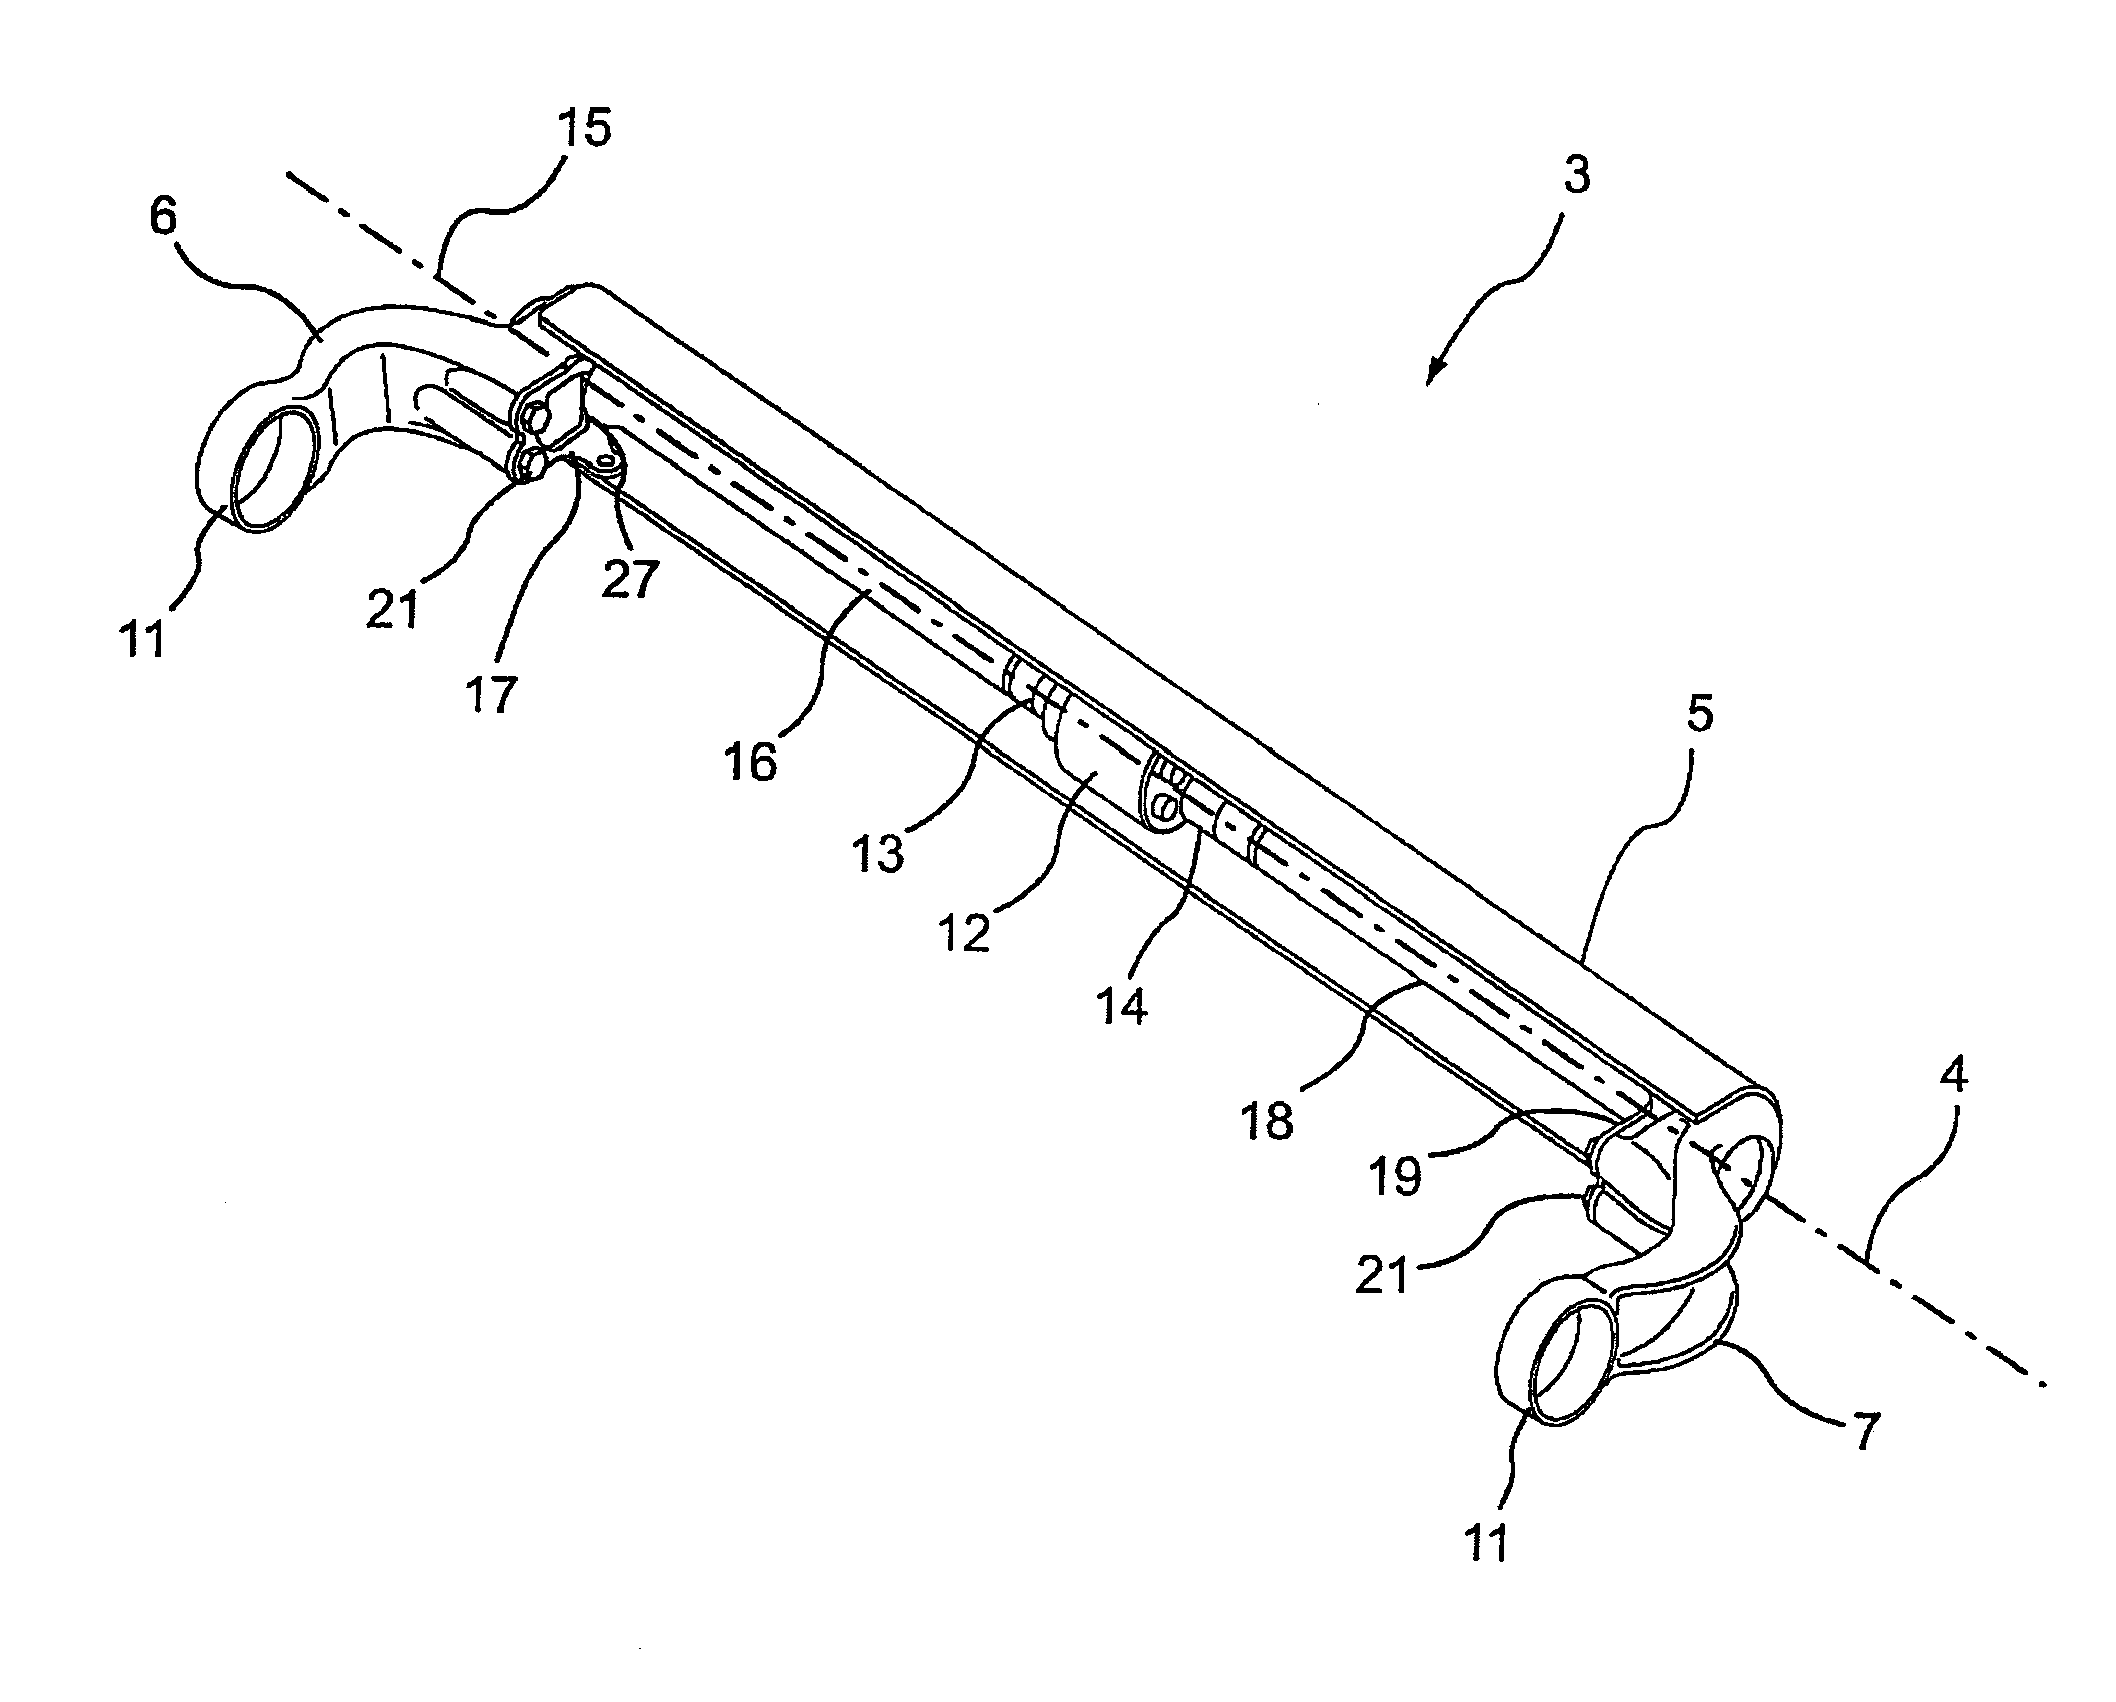 Stabilizer for a utility vehicle